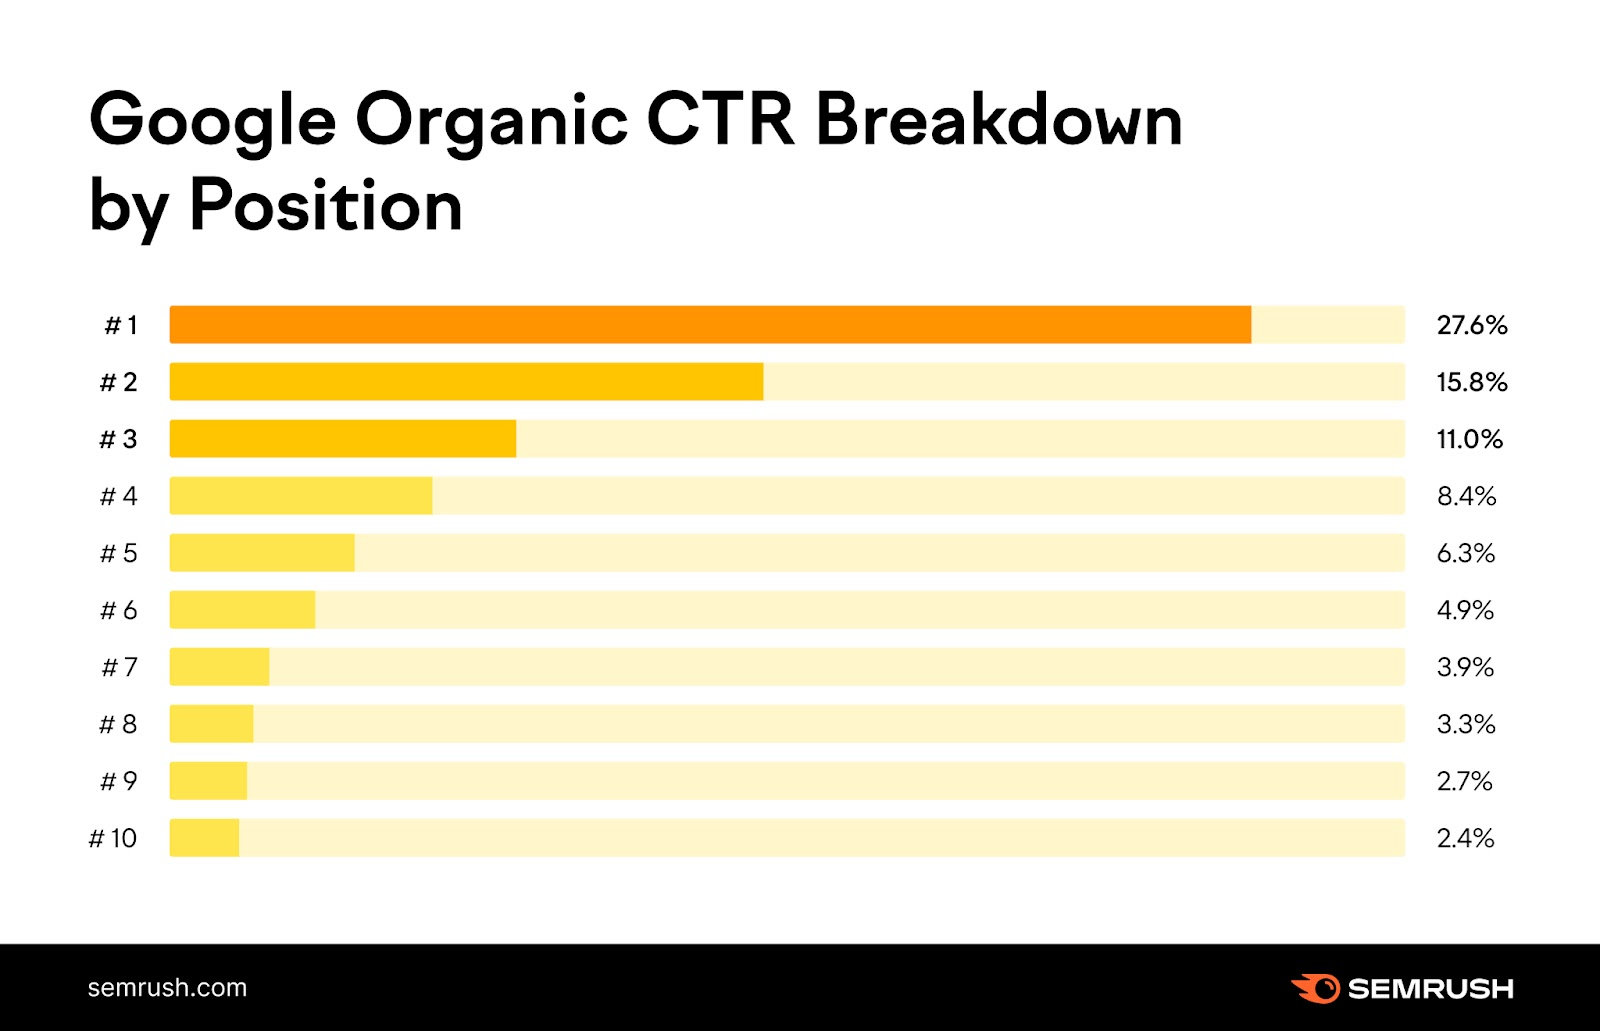 Google integrated  CTR by presumption   showing the apical  effect   gets 27.6% of clicks, with this decreasing down   to presumption   10 that gets 2.4% of clicks.